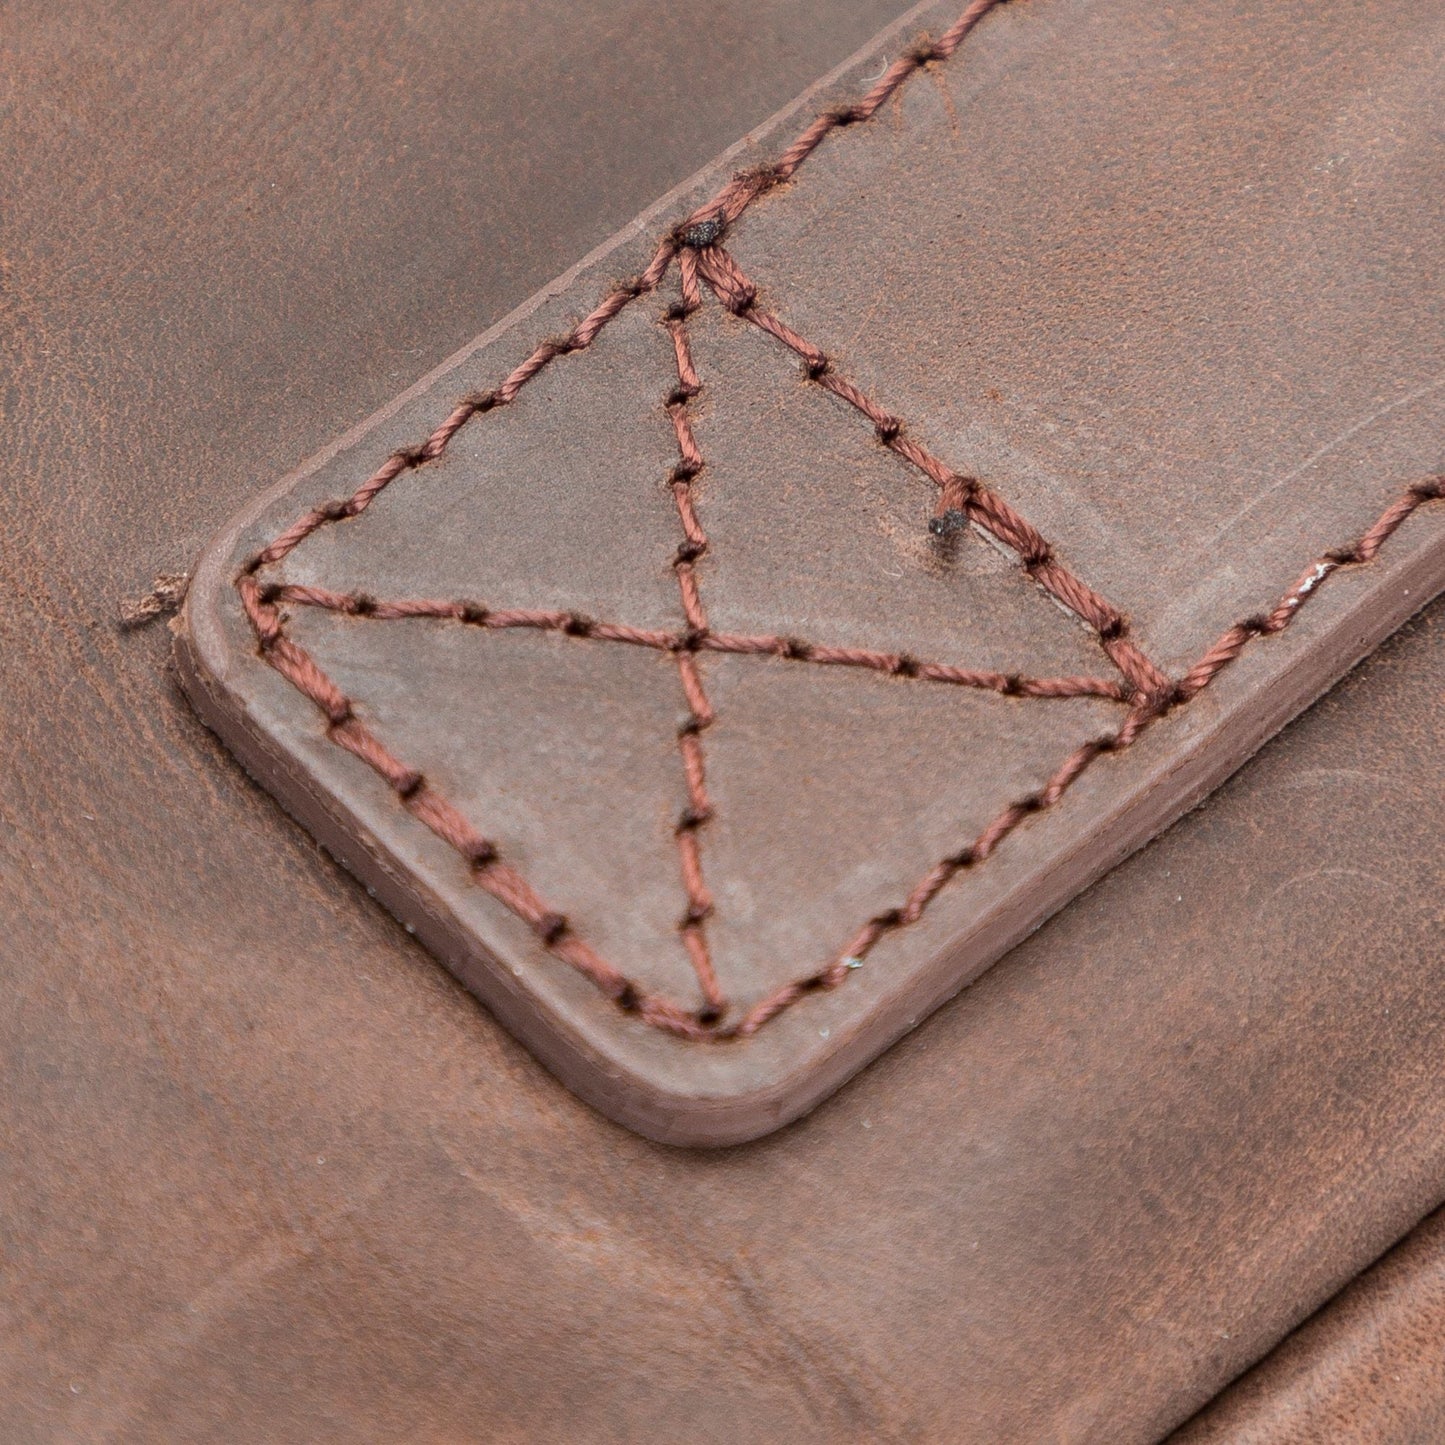 Kemmerer Leather Sleeve for iPad and MacBook